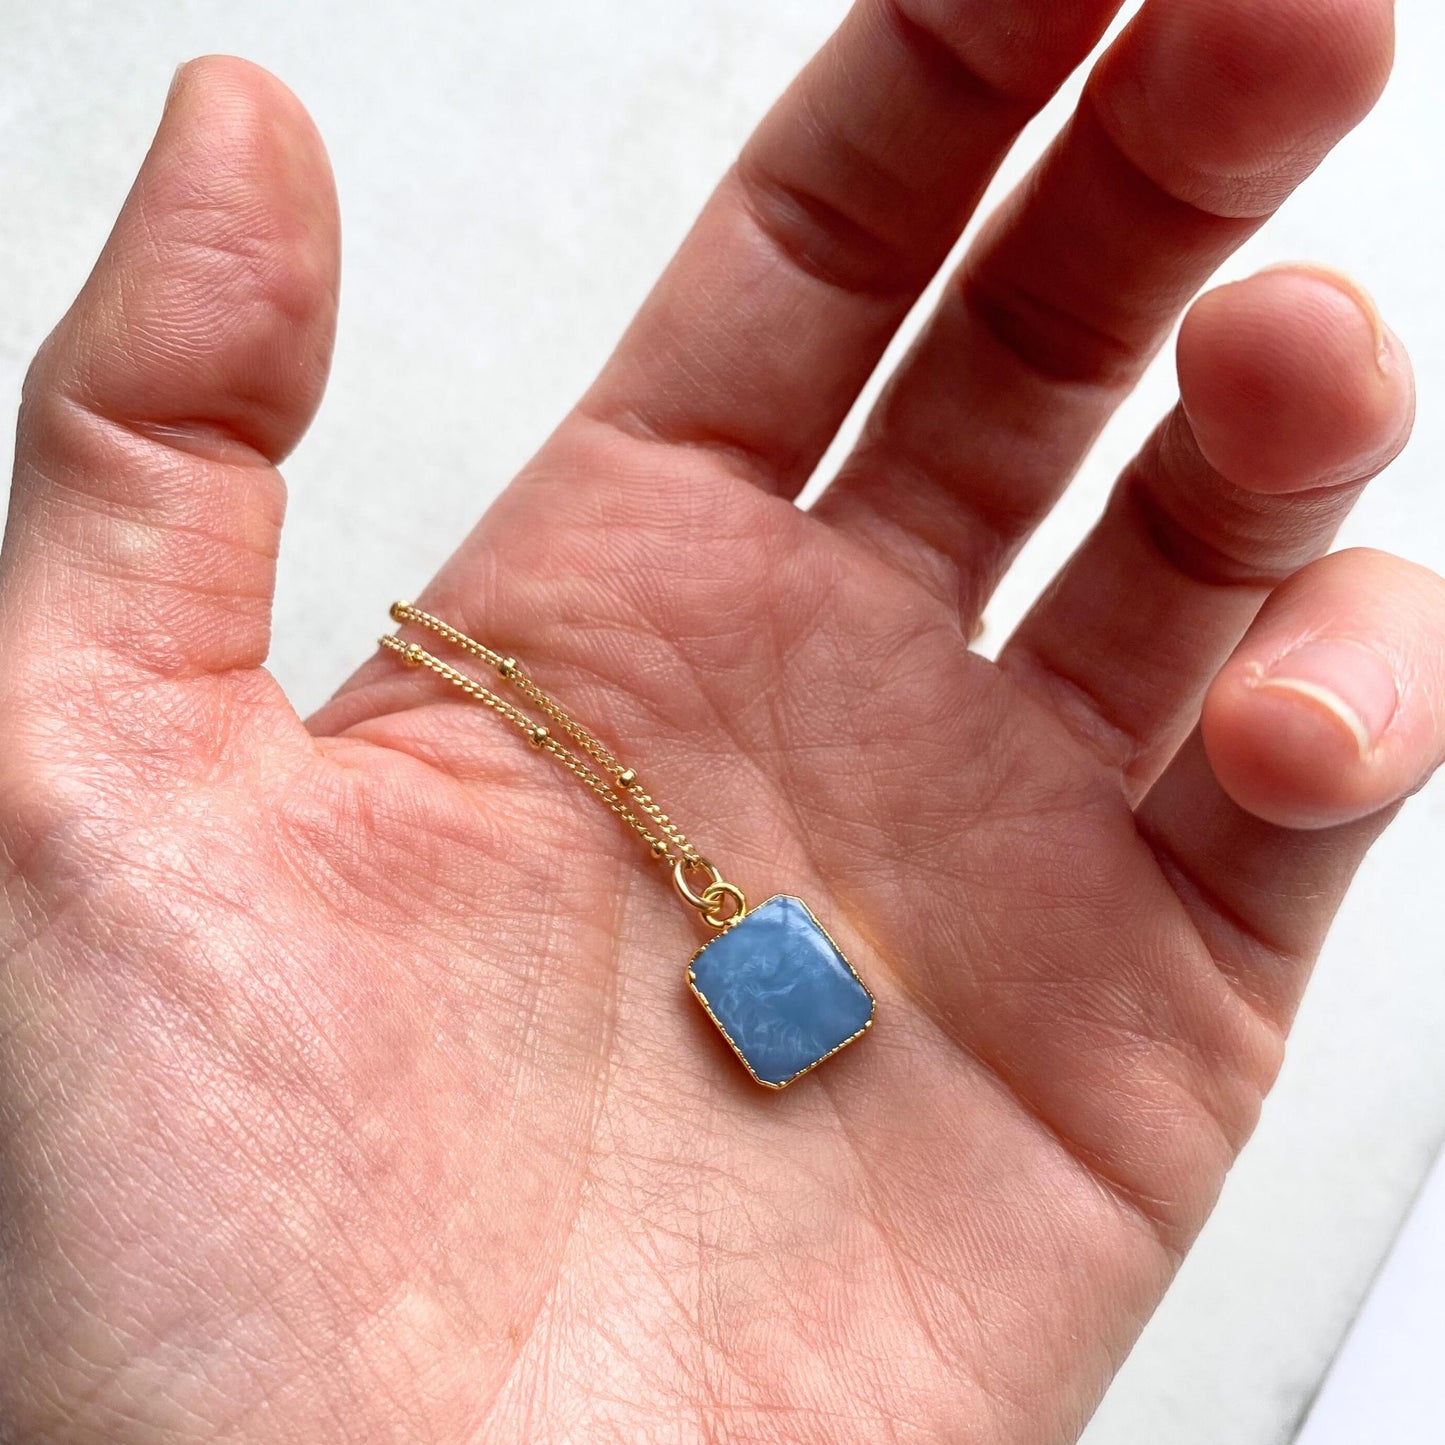 Blue Opal Gem Slice Necklace | Purity (Gold Plated)